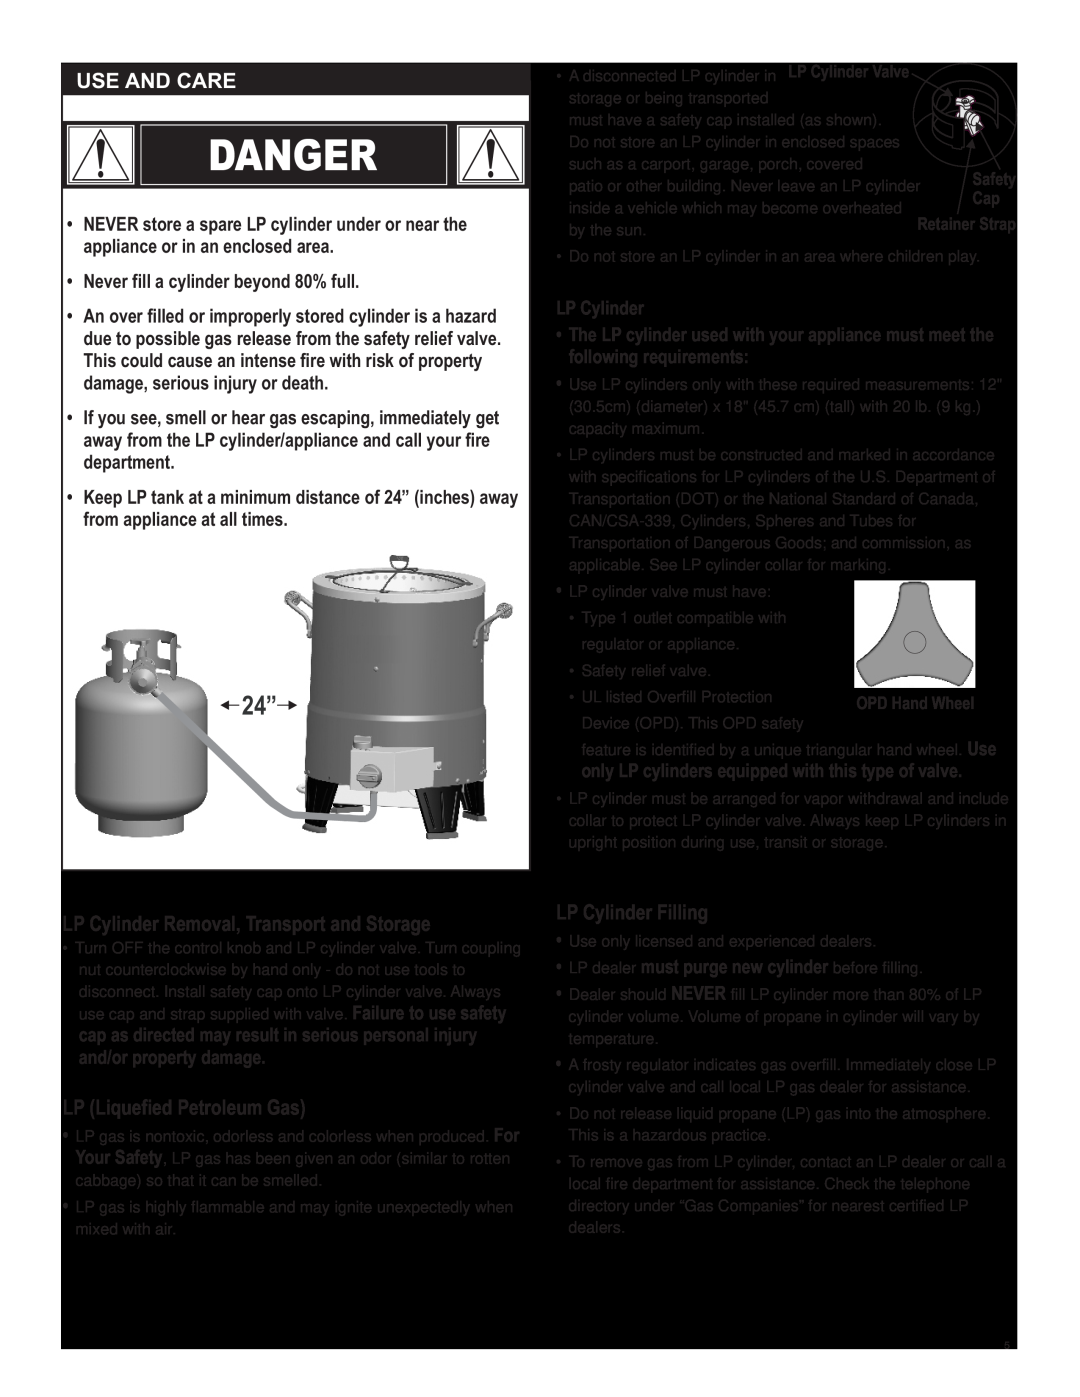 Char-Broil 10101480 manual Use And Care, Danger, Never fill a cylinder beyond 80% full, LP Cylinder 